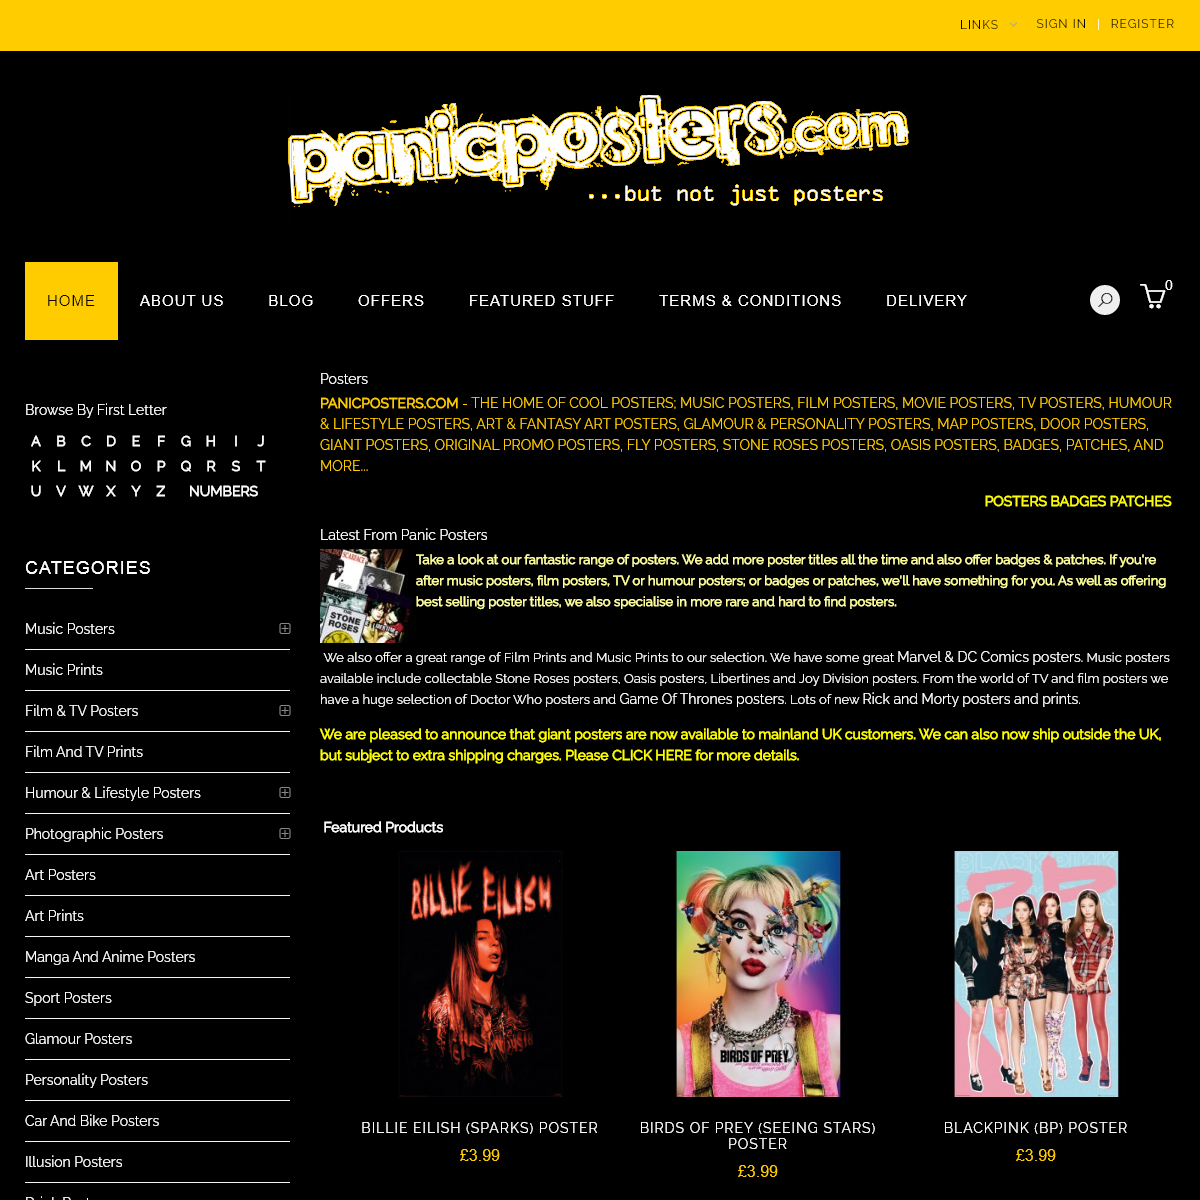 A complete backup of panicposters.com